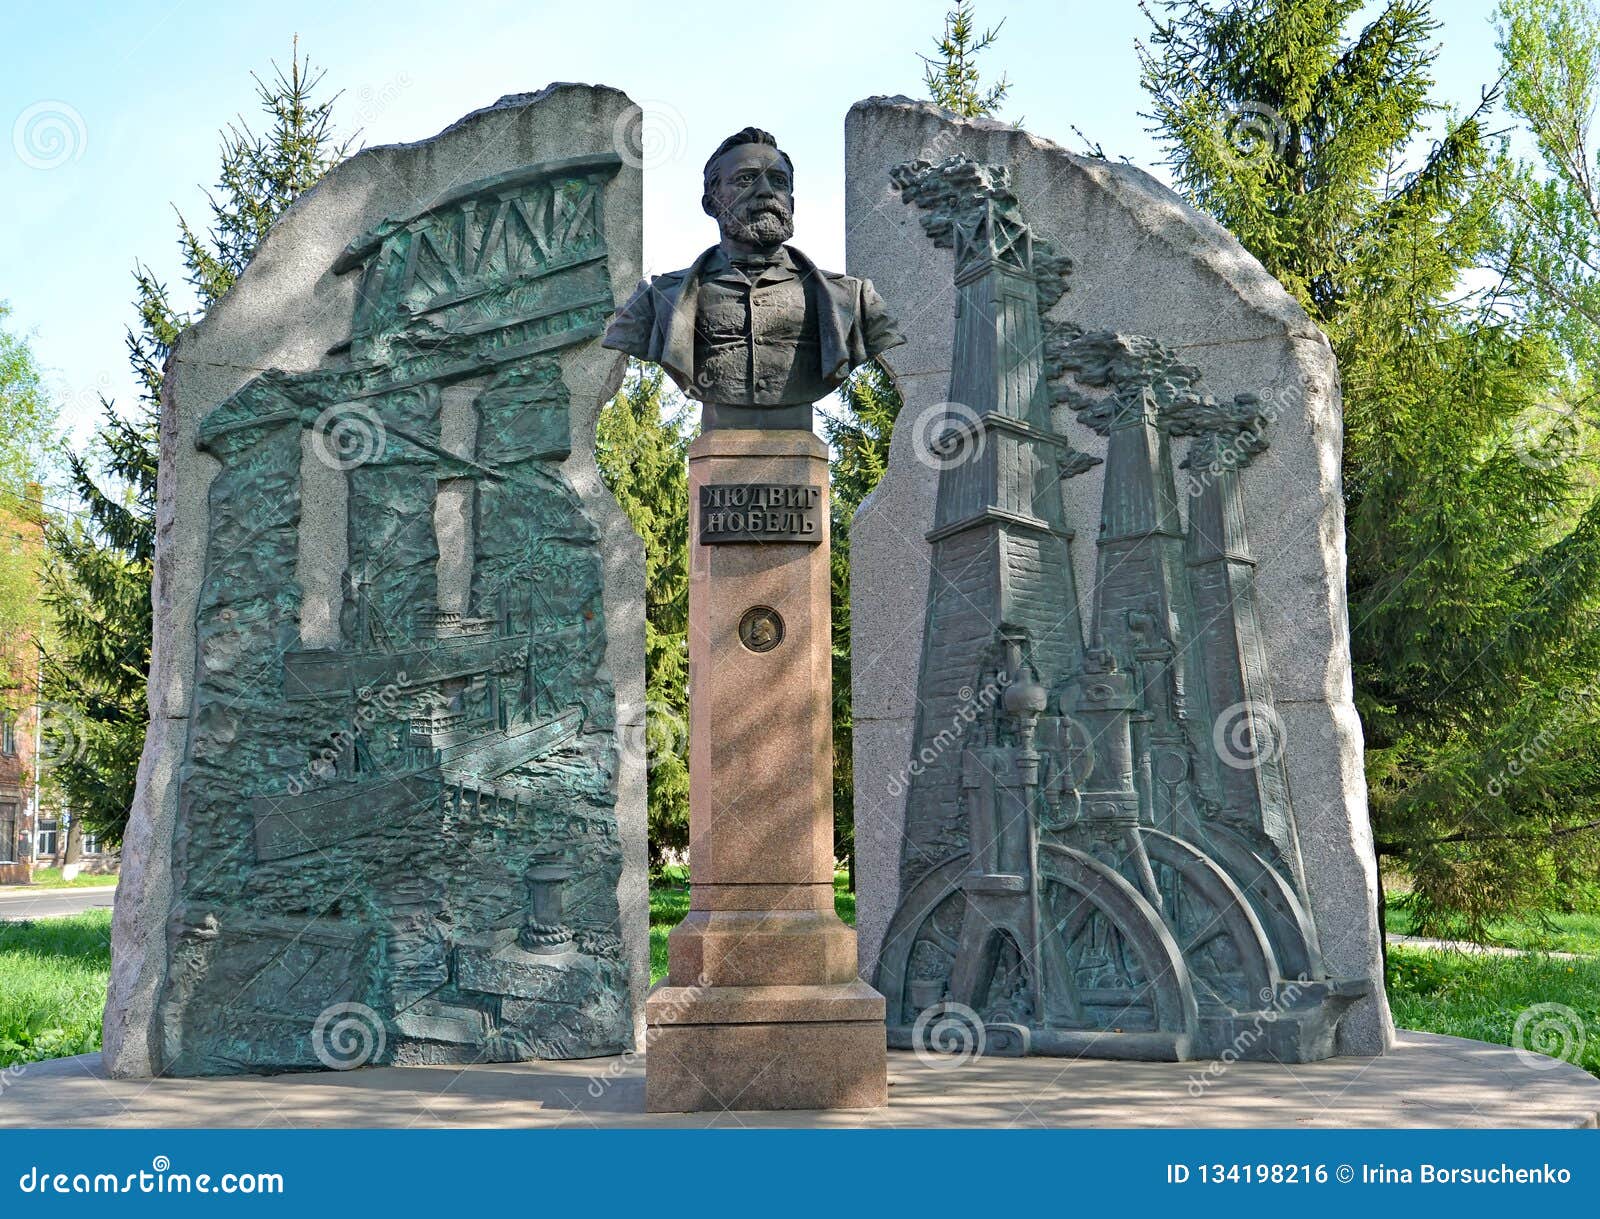 rybinsk, russia. a monument to the industrialist ludwig nobel in sunny day. the russian text - ludwig nobel